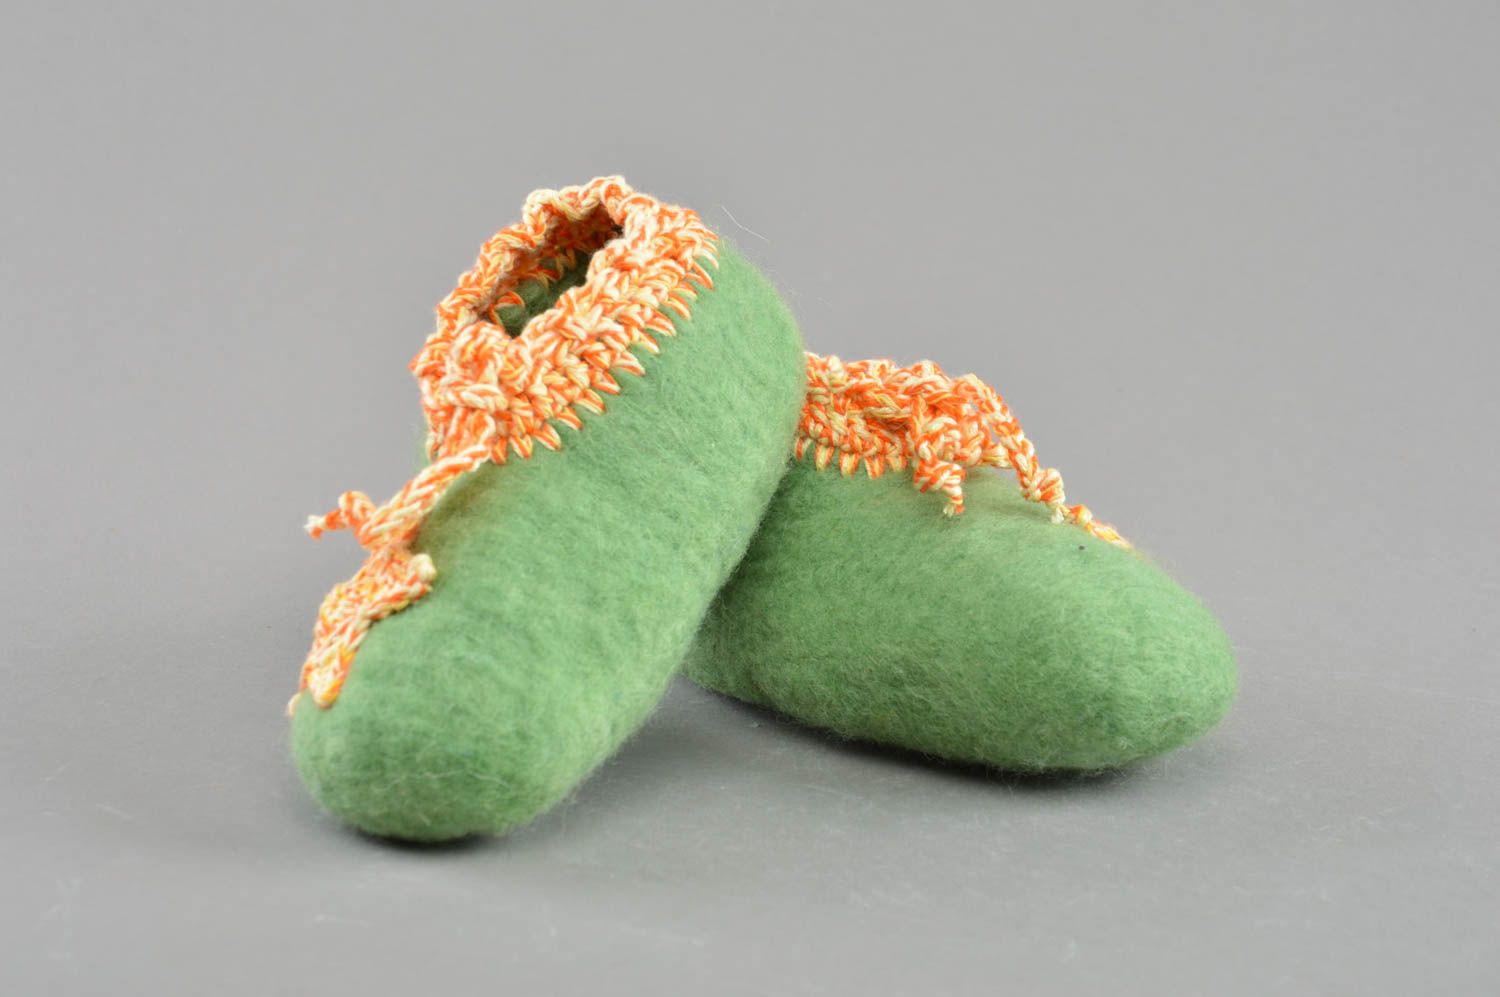 Handmade designer felted wool light green baby booties with crocheted edges photo 1